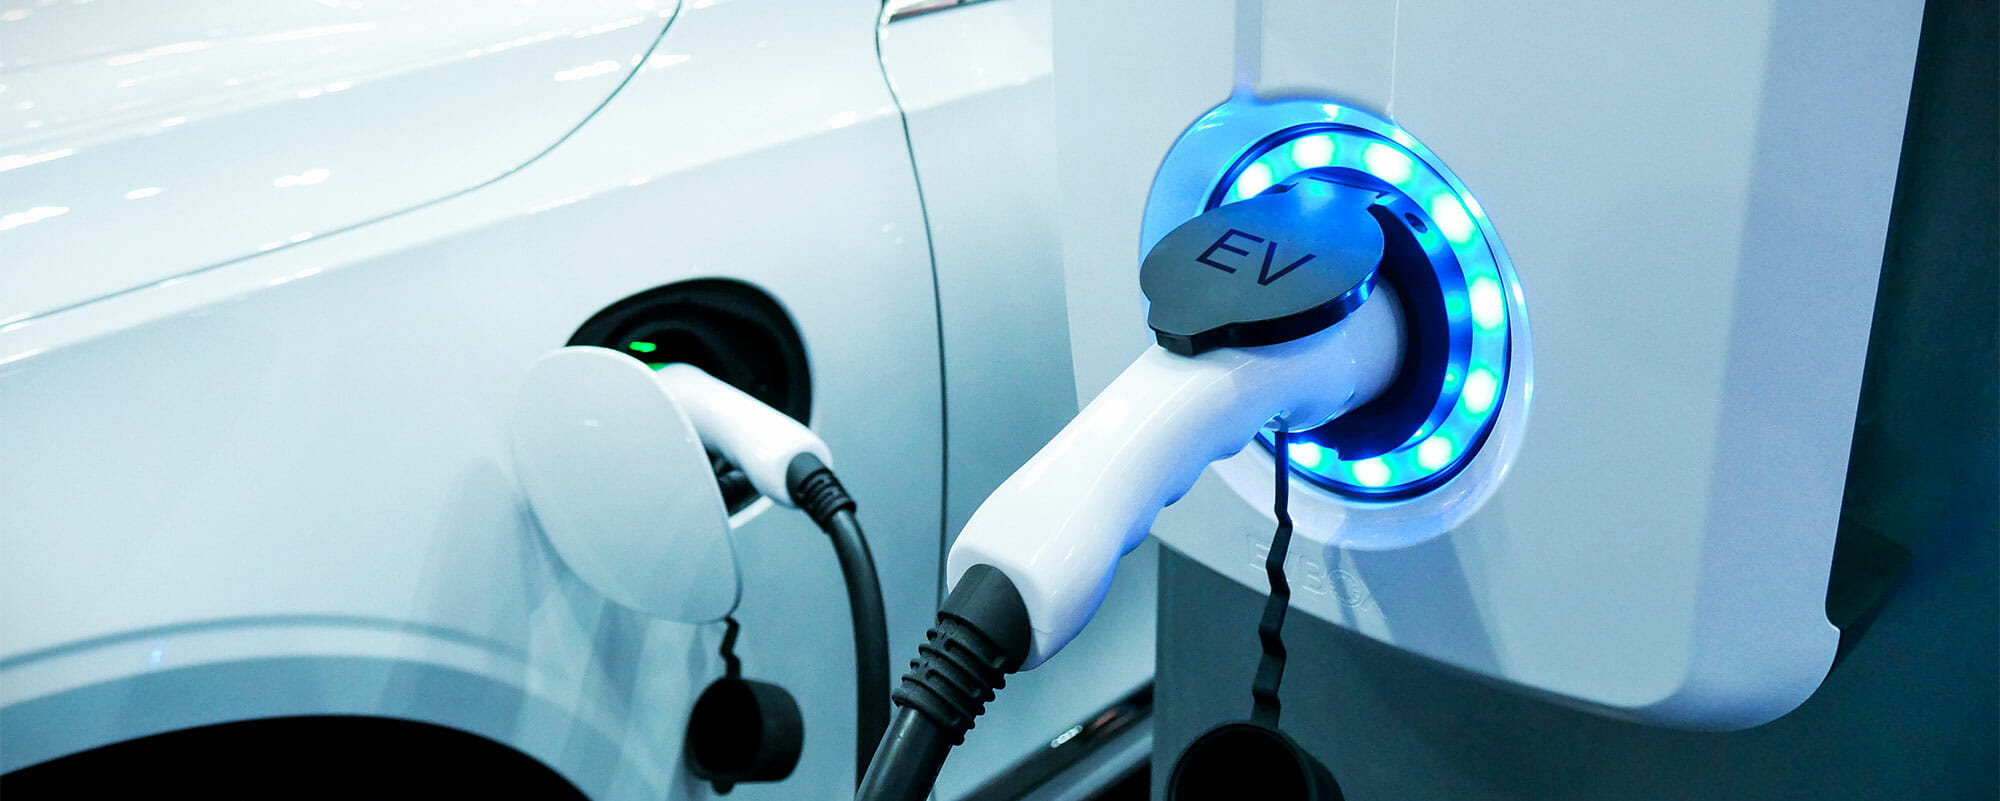 Electric Vehicles and the challenges for the future of planning and development